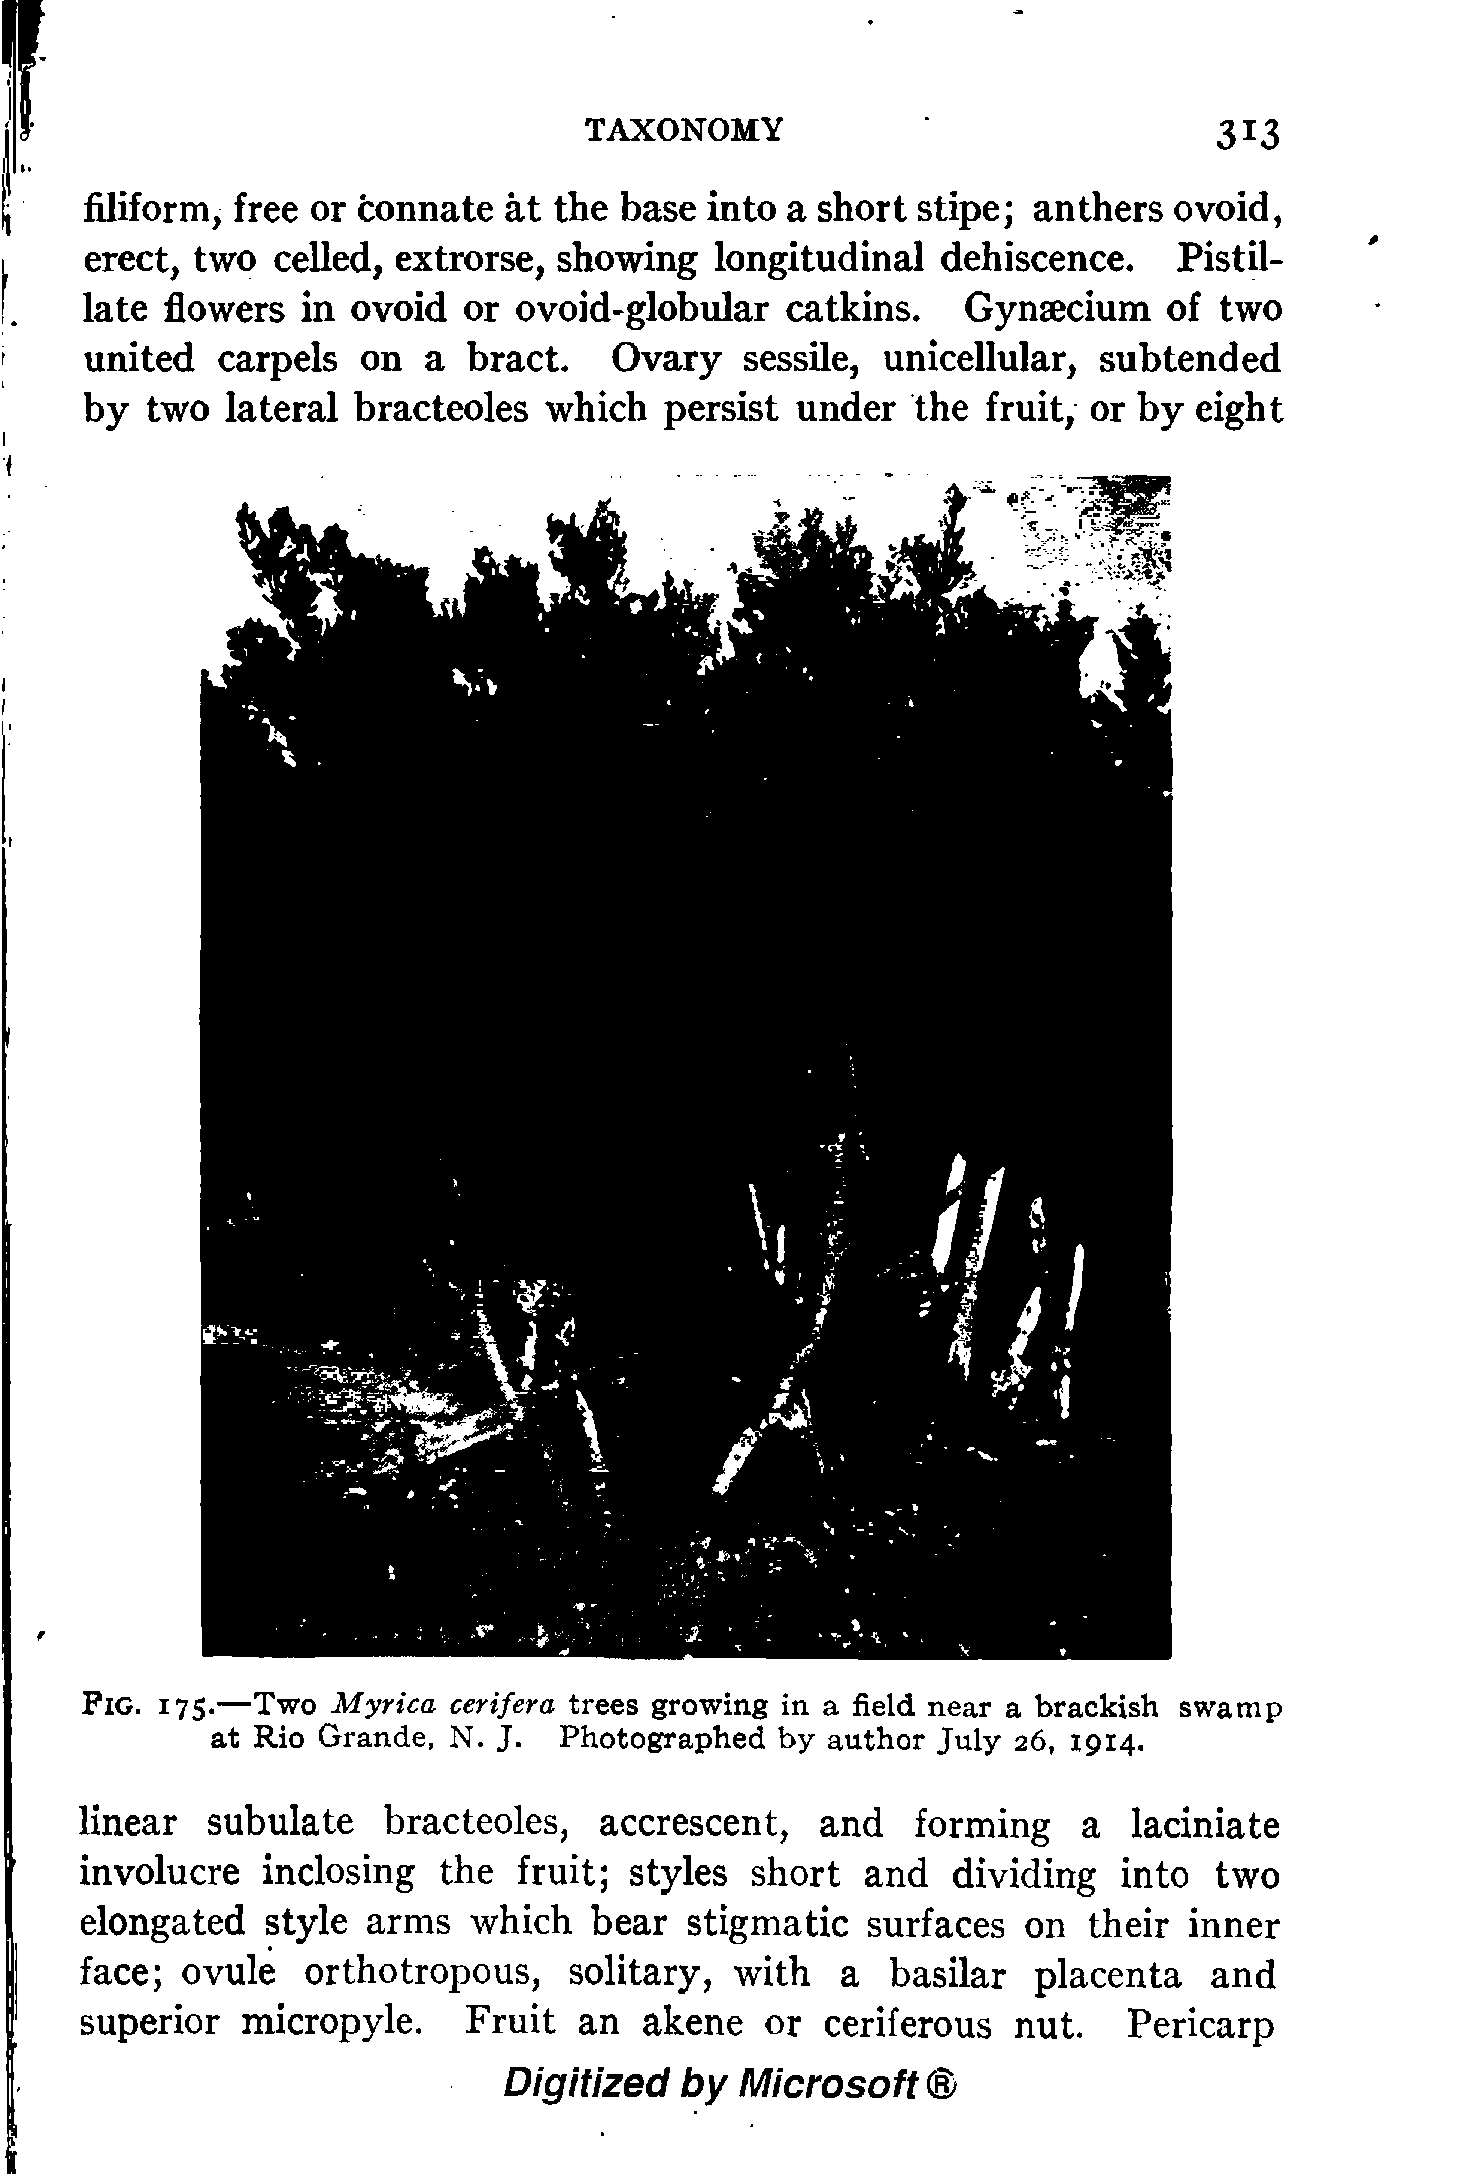 Fig. 175.—Two Myrica cerifera trees growing in a field near a brackish swamp at Rio Grande, N. J. Photographed by author July 26, 1914.